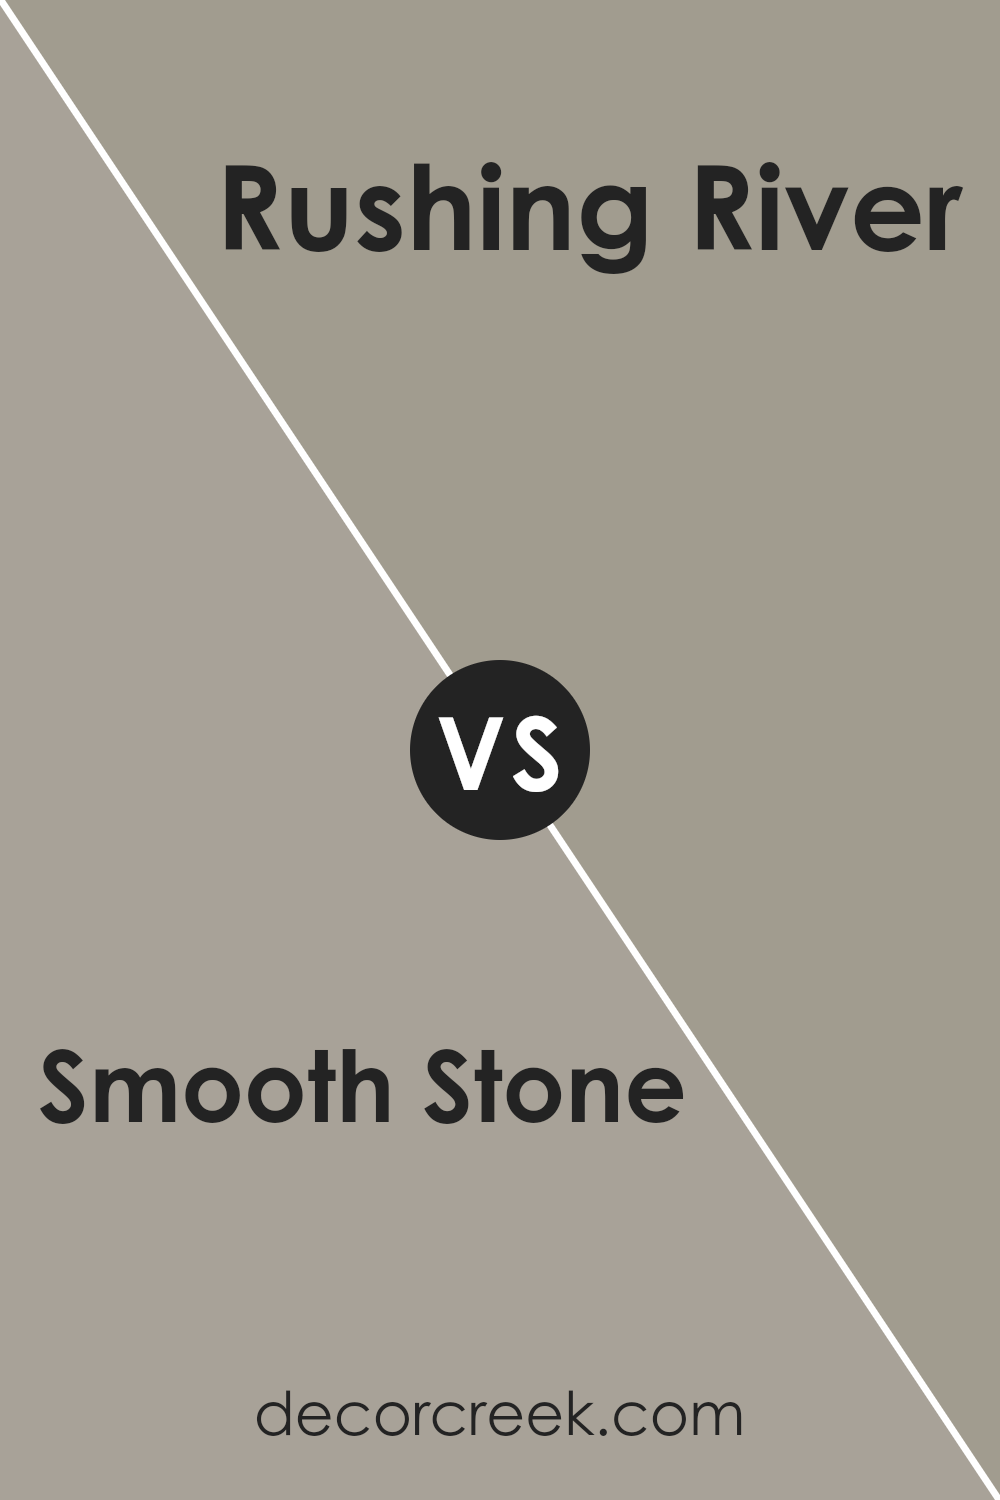 smooth_stone_sw_9568_vs_rushing_river_sw_7746